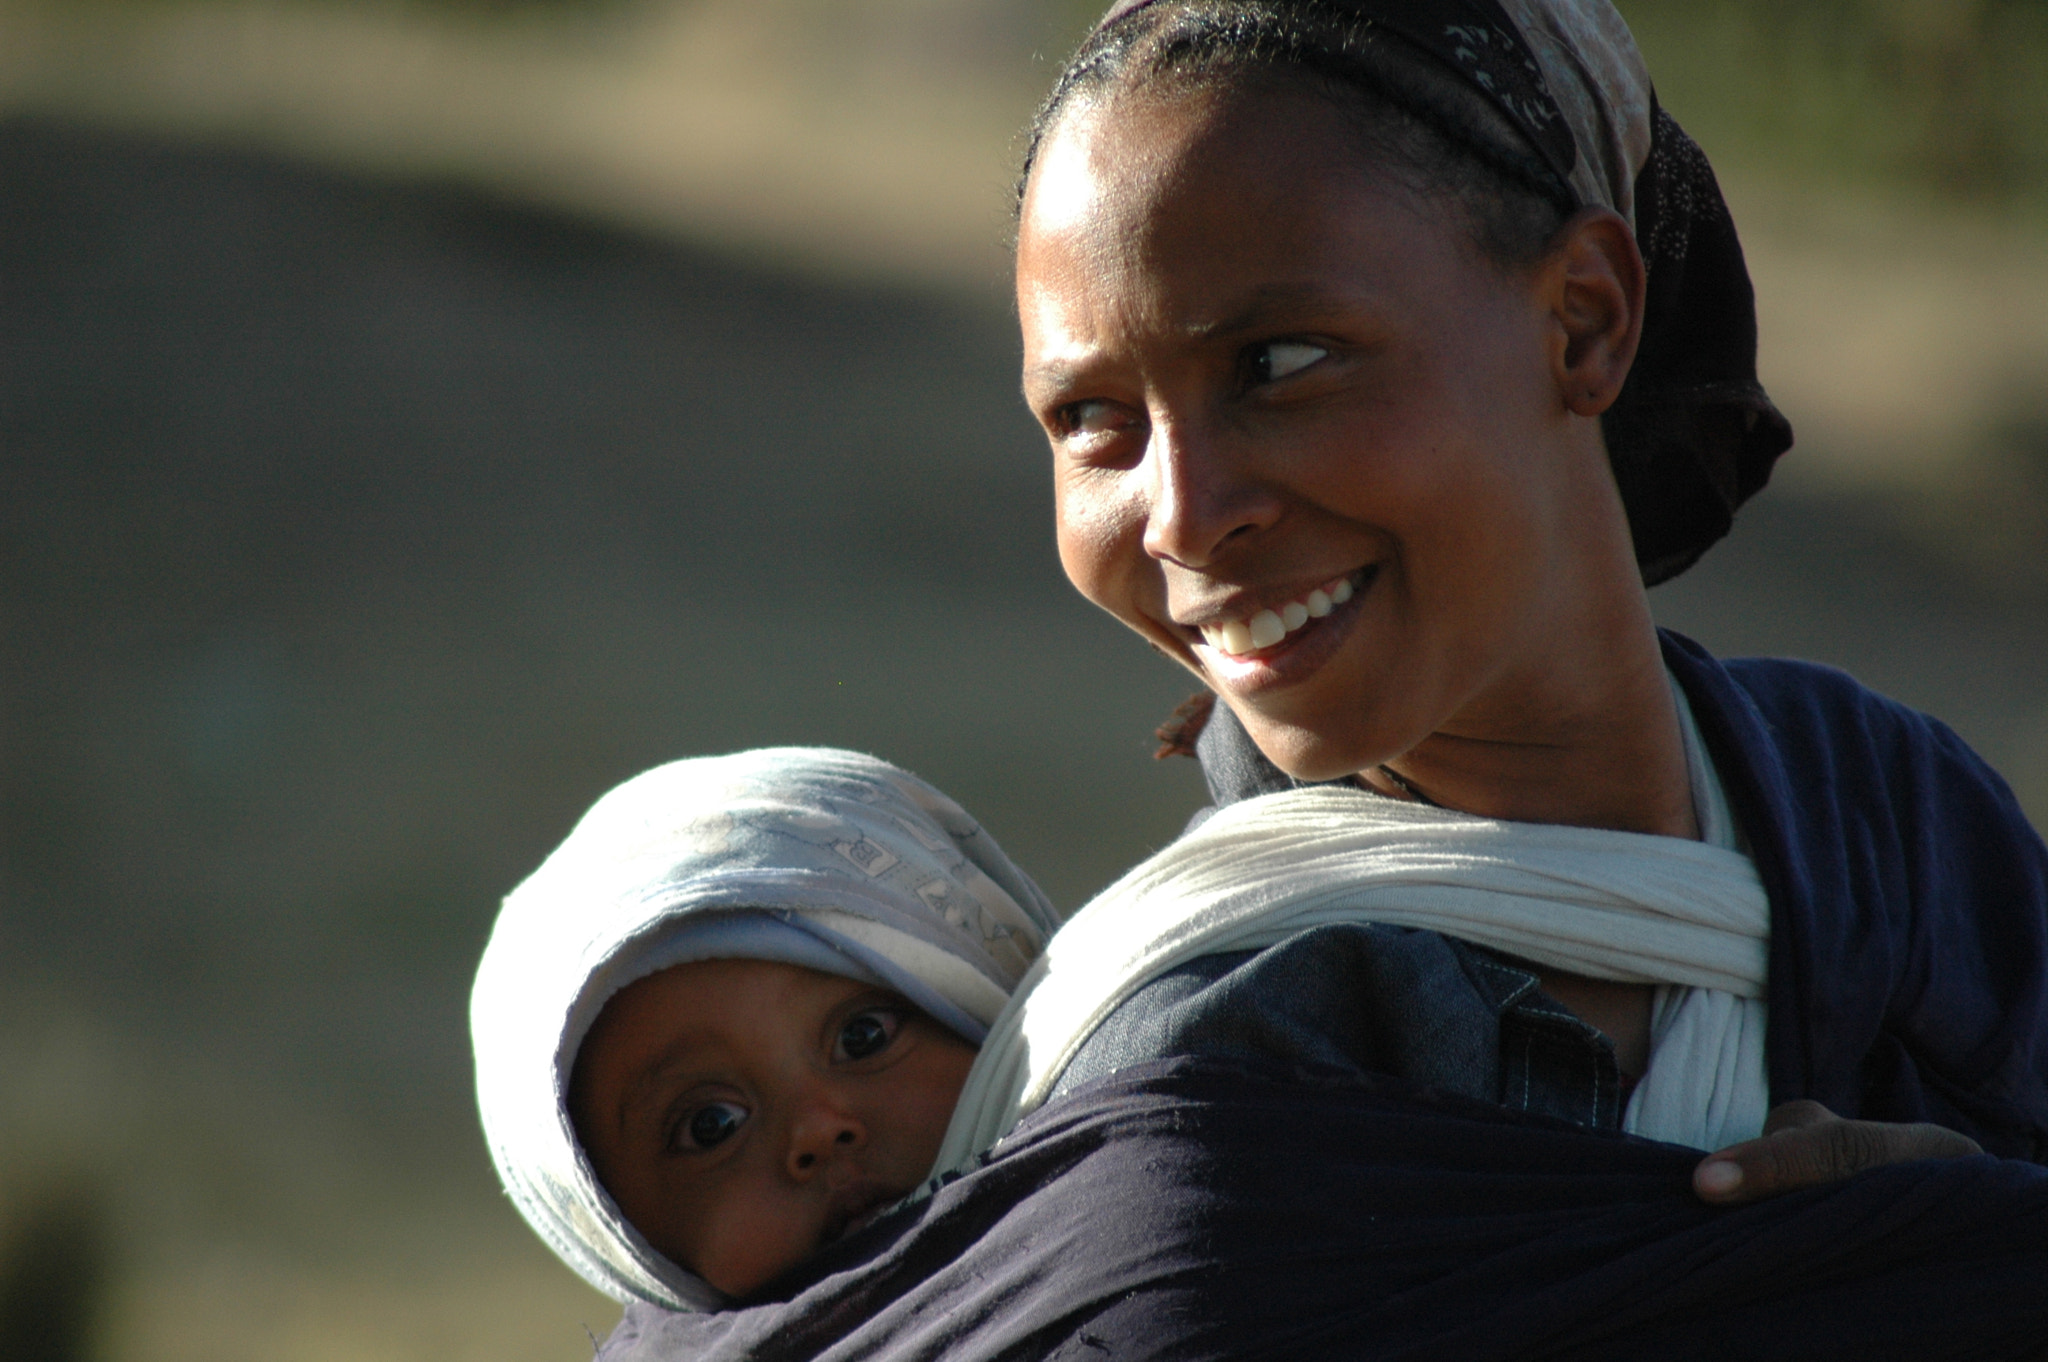 Tamron AF 70-300mm F4-5.6 Di LD Macro sample photo. Ethiopia, dessie, beautiful woman, village mom, baby, mother, happiness, love of child, hopeful photography